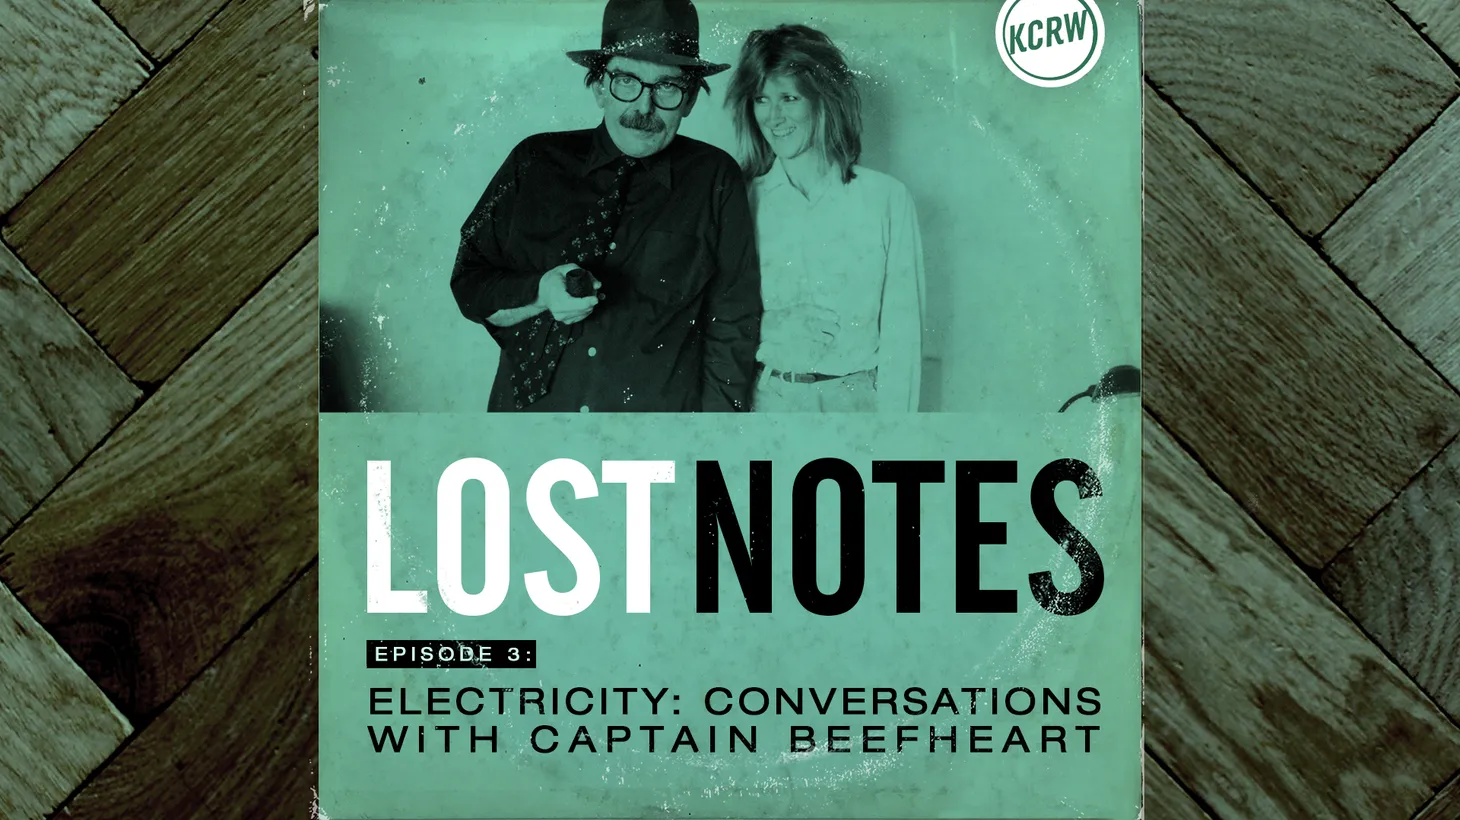 In this intimate radio portrait of one of music’s most legendary eccentric geniuses, writer Kristine McKenna offers you a visceral experience of what it was like to be friends with Don Van Vliet (aka Captain Beefheart).